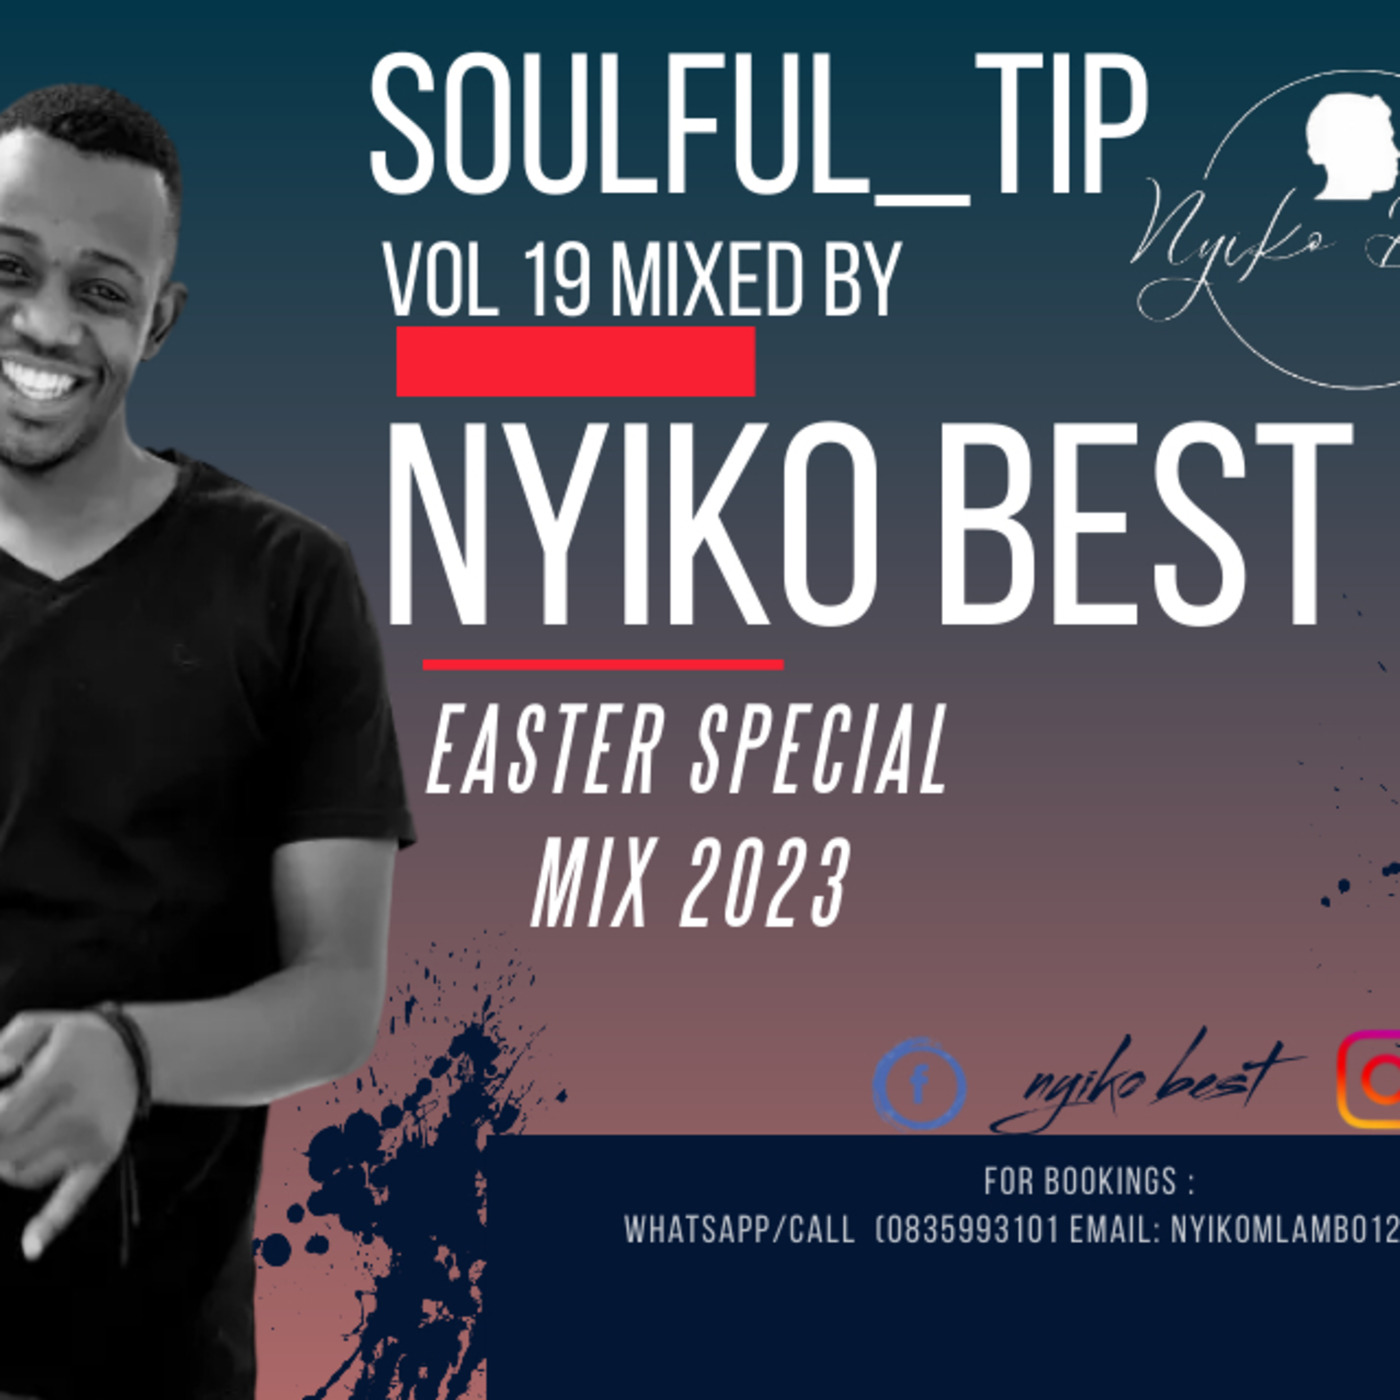 Soulful_Tip Vol 19 Mixed By Nyiko Best (Special Gospel Mix ) Easter Edition